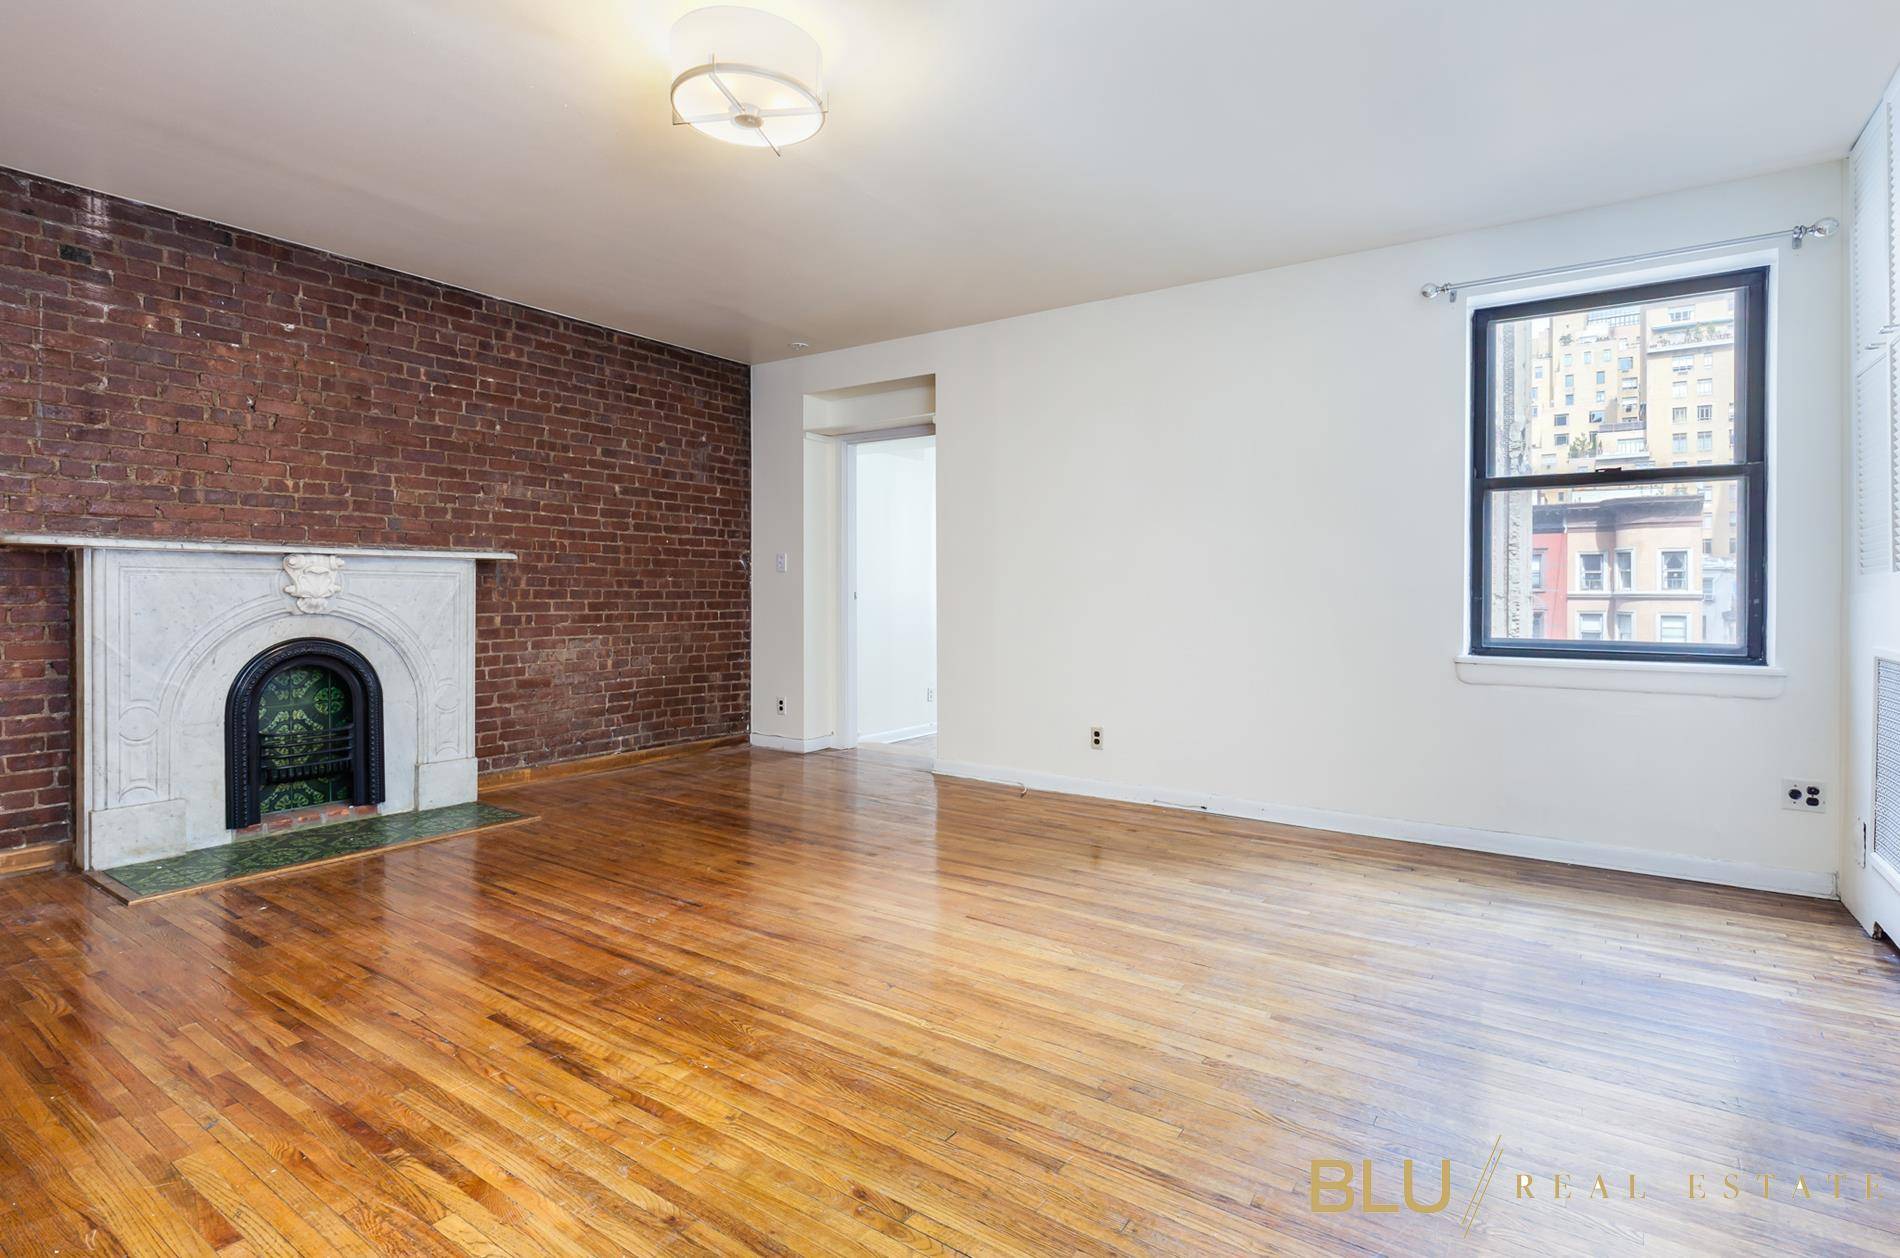 Welcome to this truly oversized one bedroom, one bathroom townhouse home in prime Upper West Side location on West 69th Street and Central Park West !